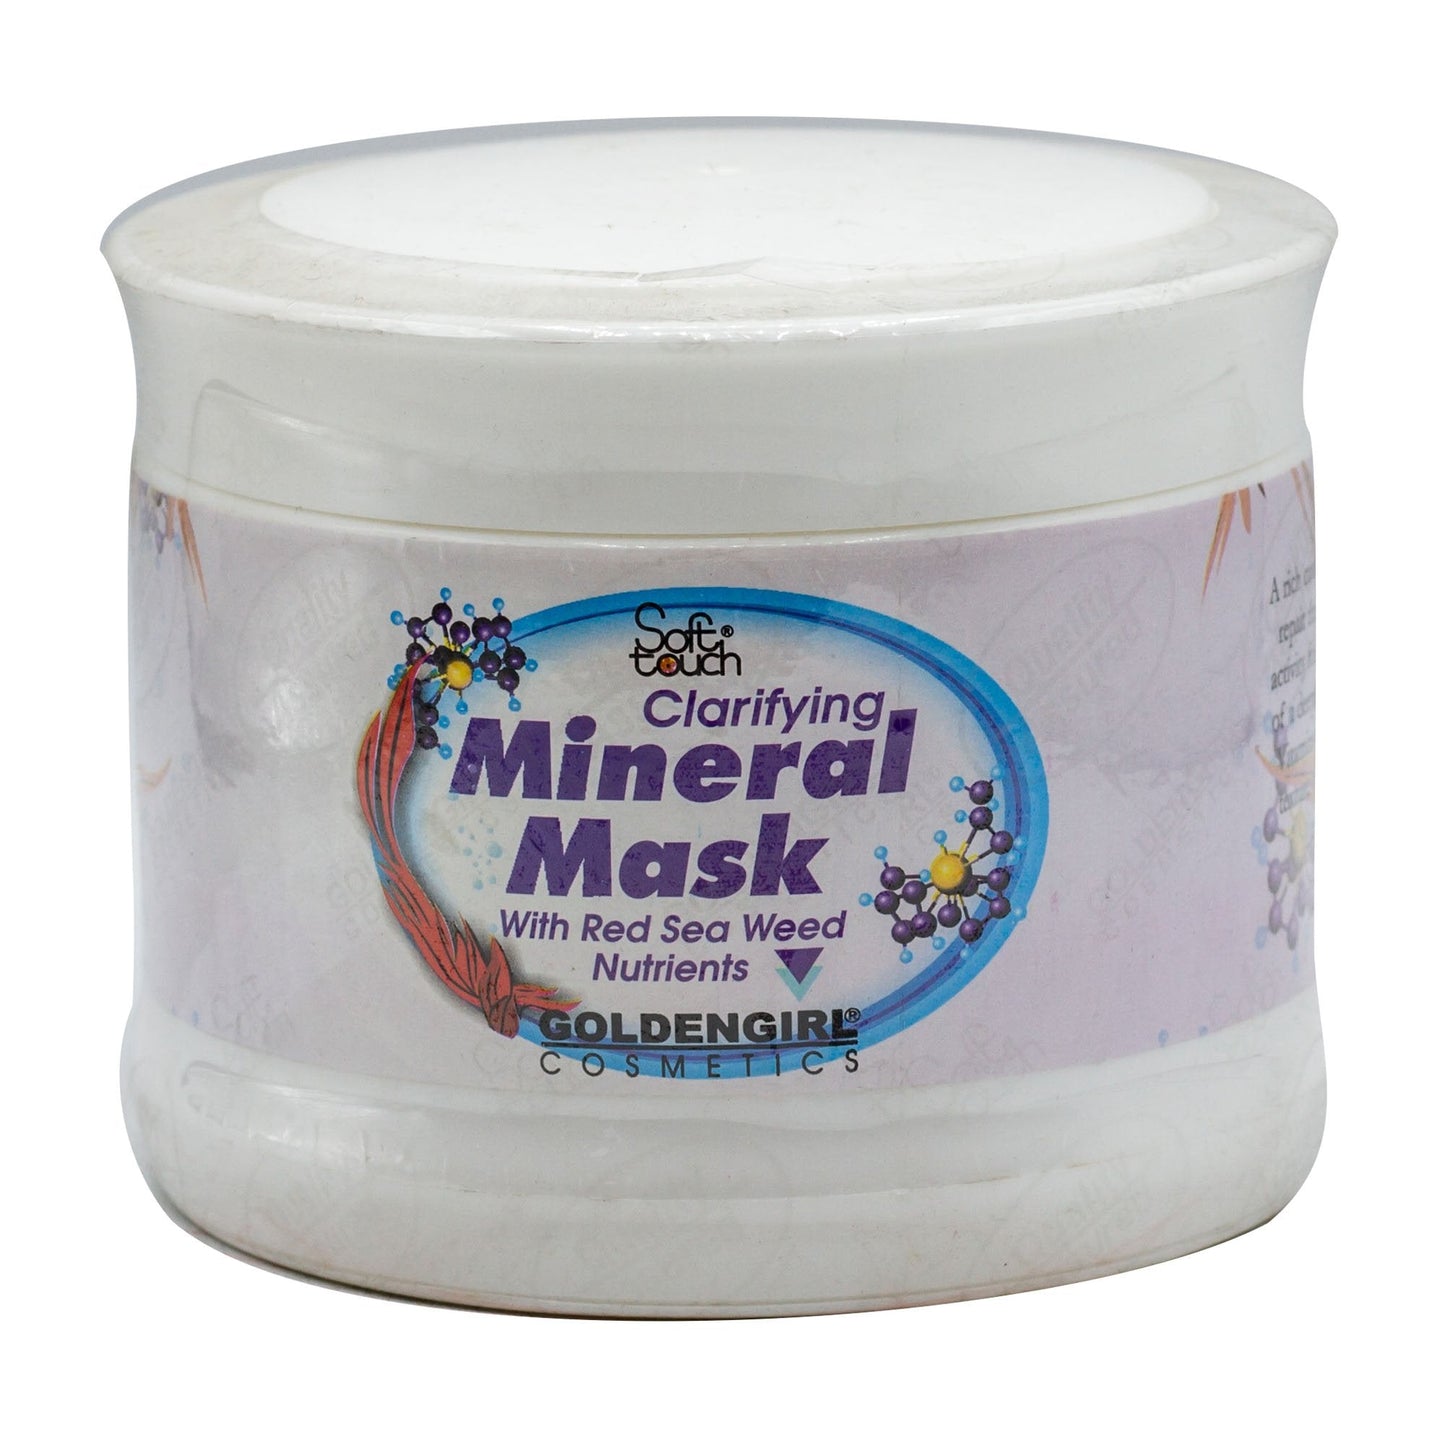 GOLDEN GIRL MINERAL MASK RED SFA WEED NUTRIENTS 500 GM